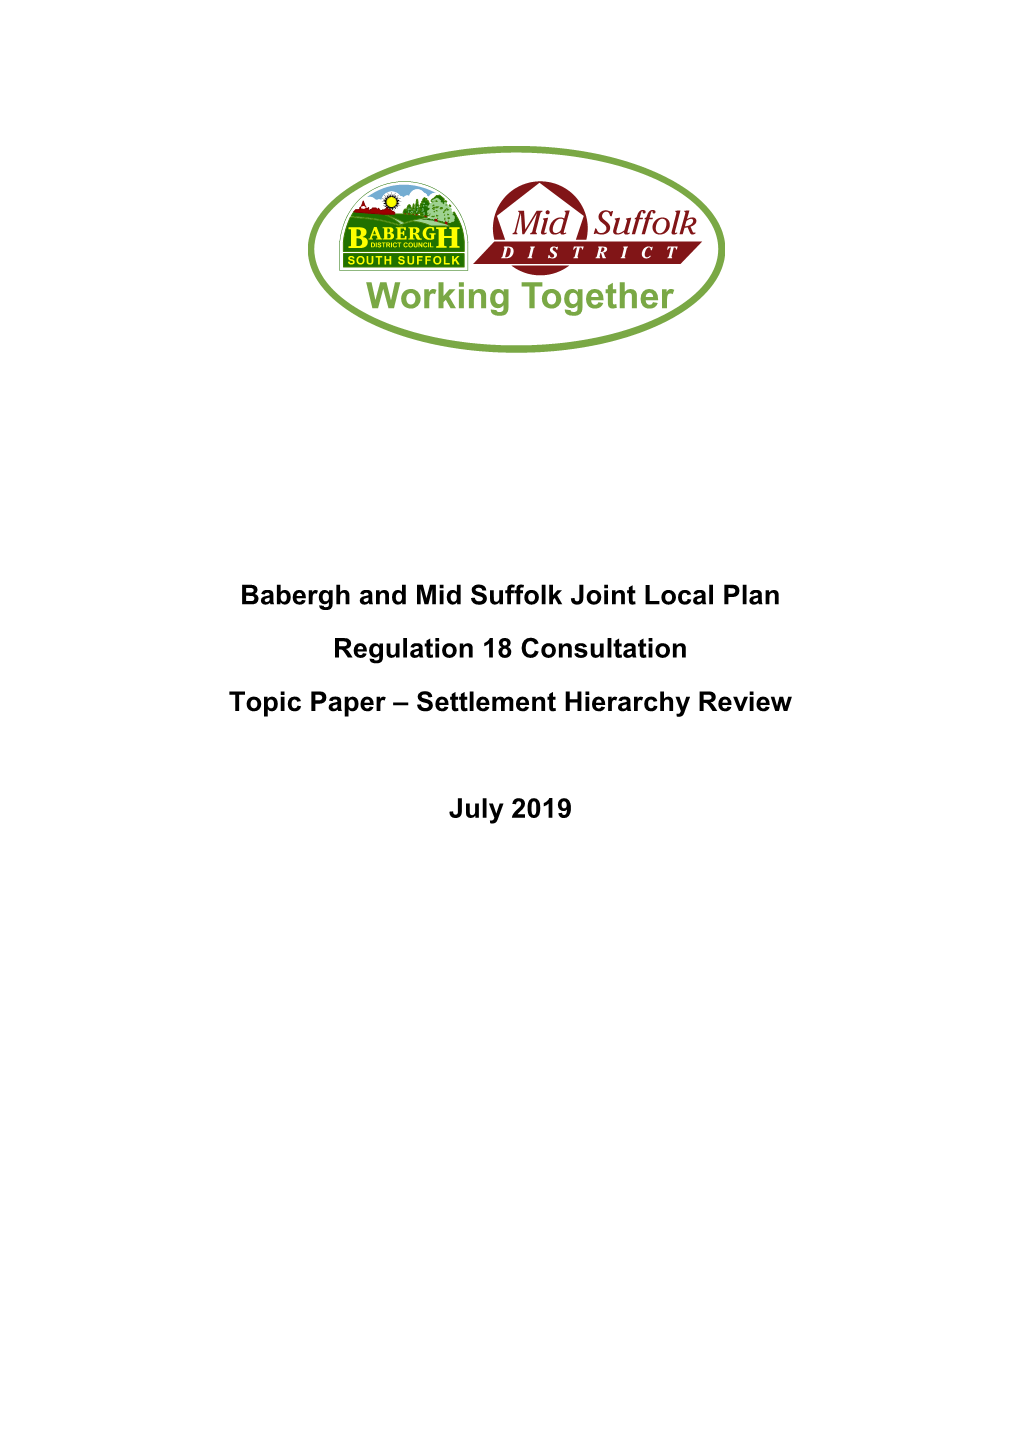 Topic Paper – Settlement Hierarchy Review